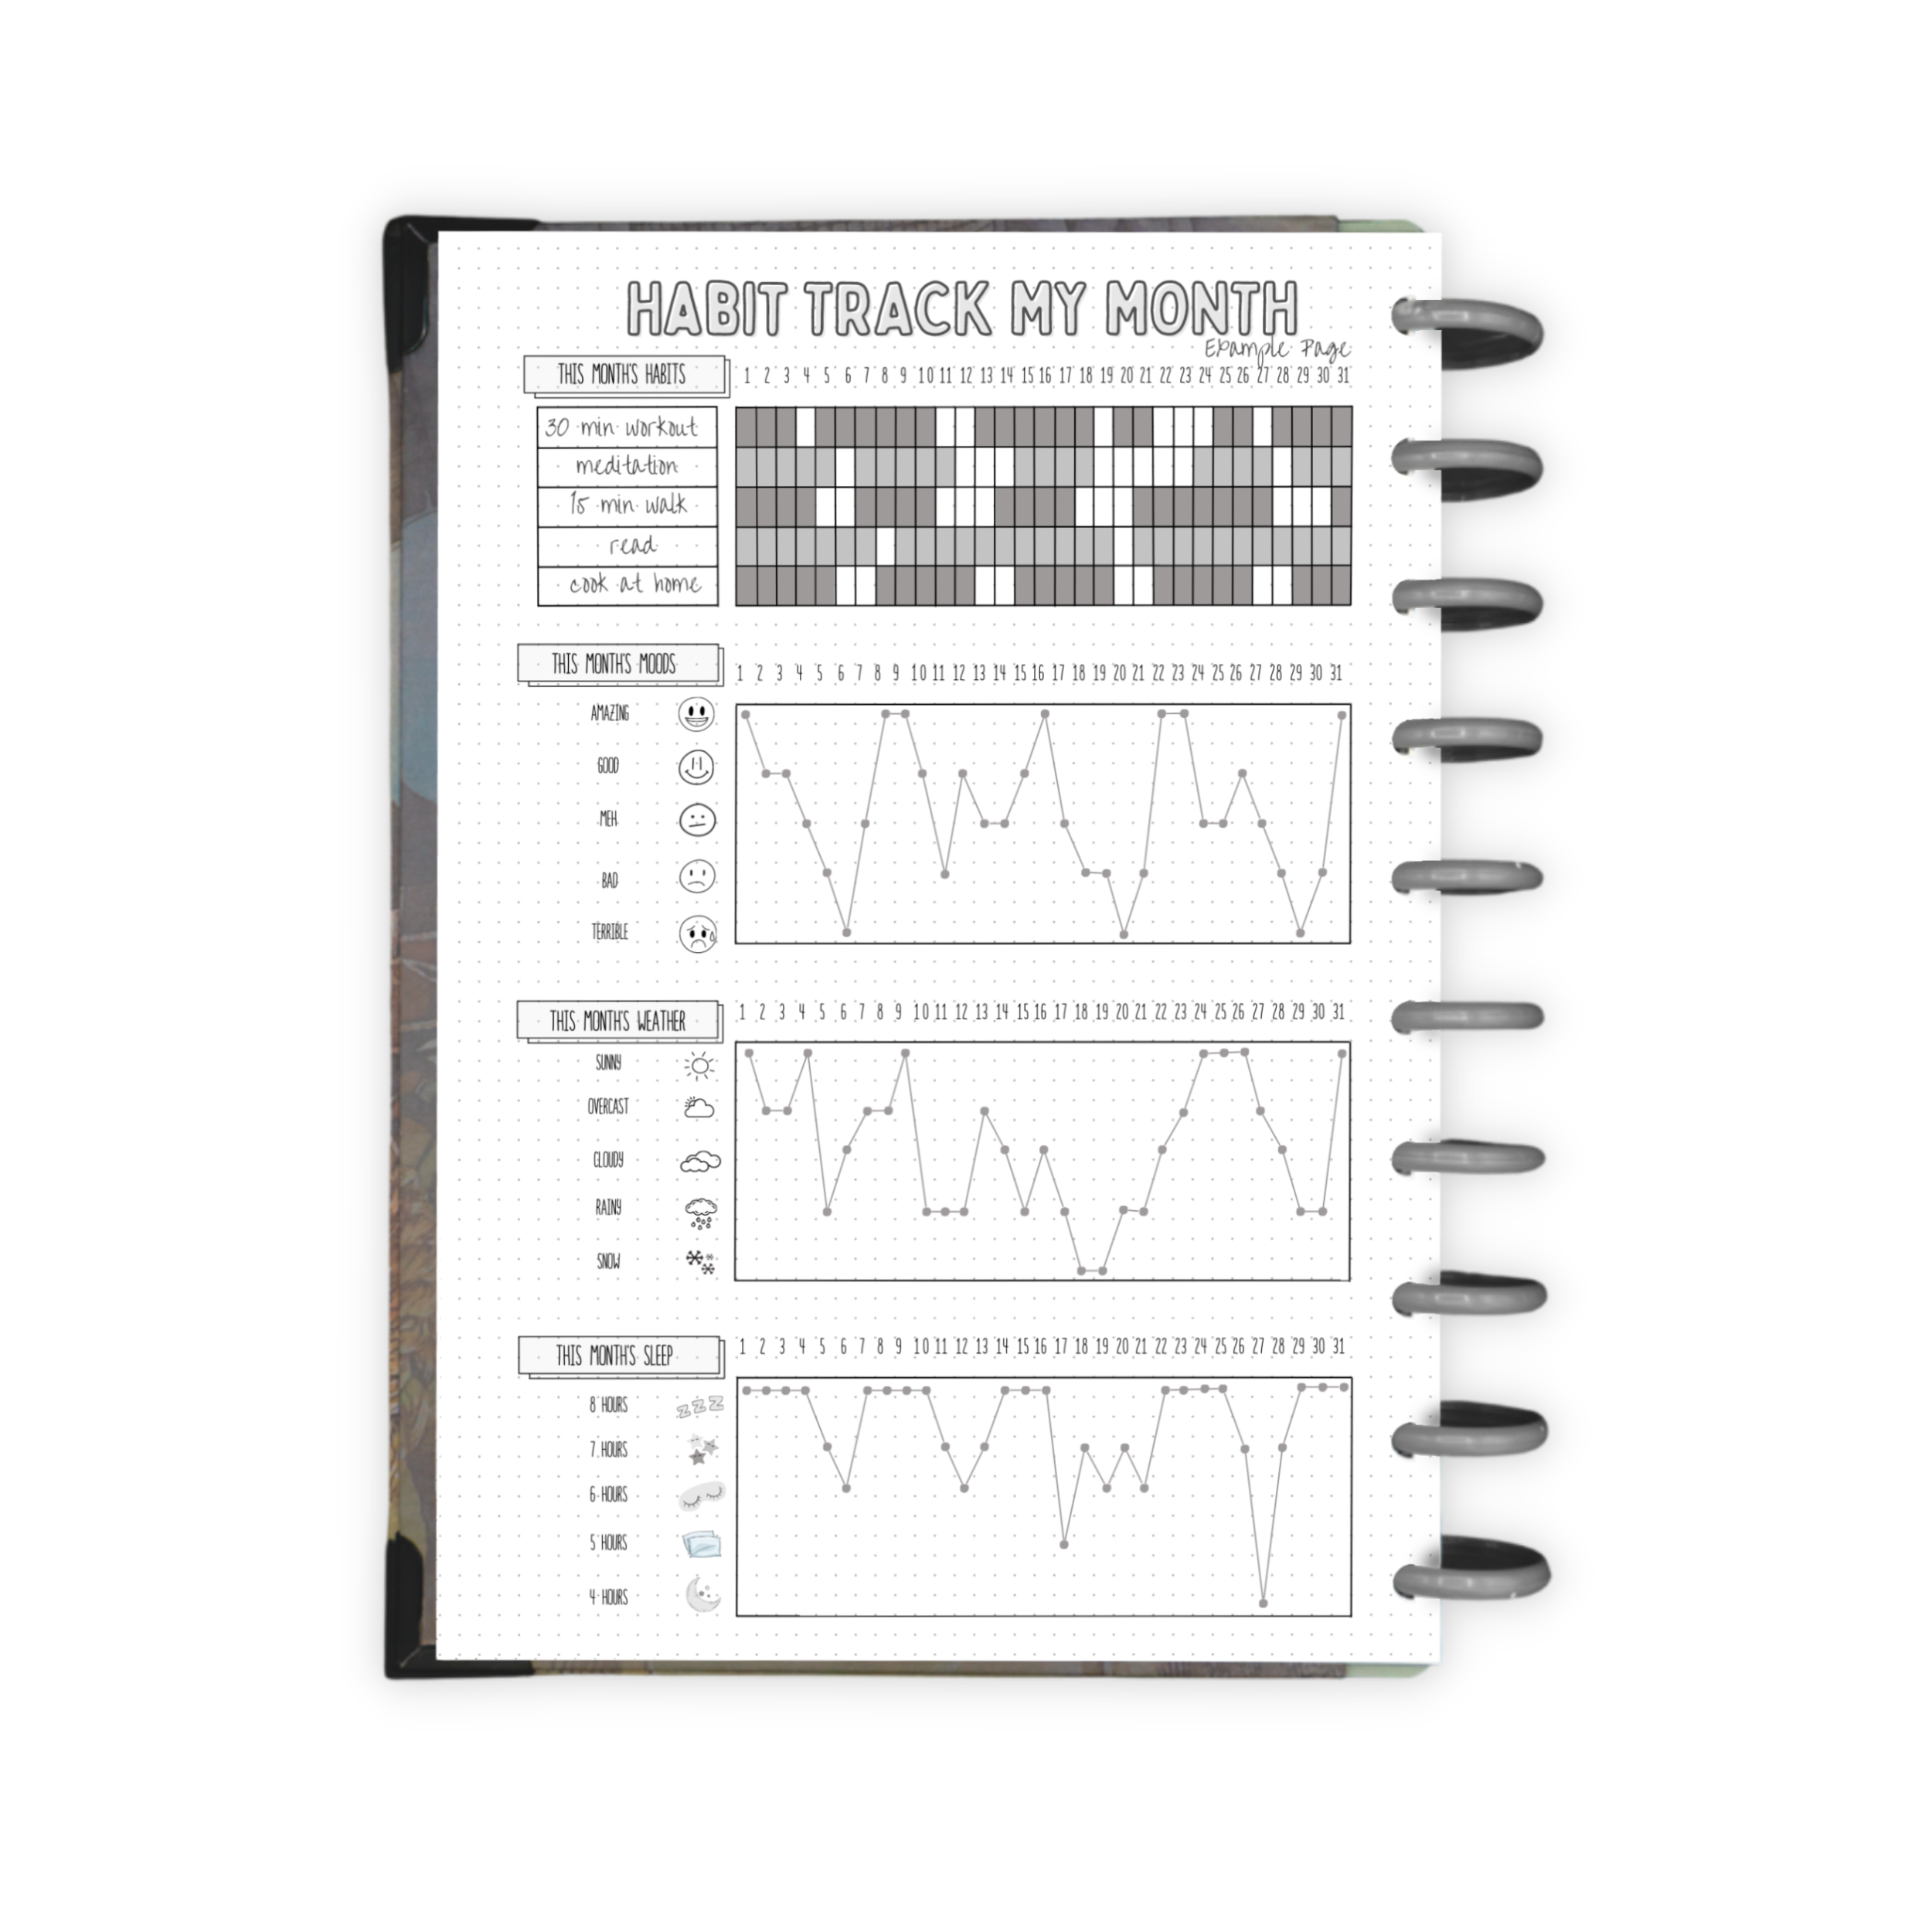  Habit Tracker Inserts for Personal Size Planners (3.75